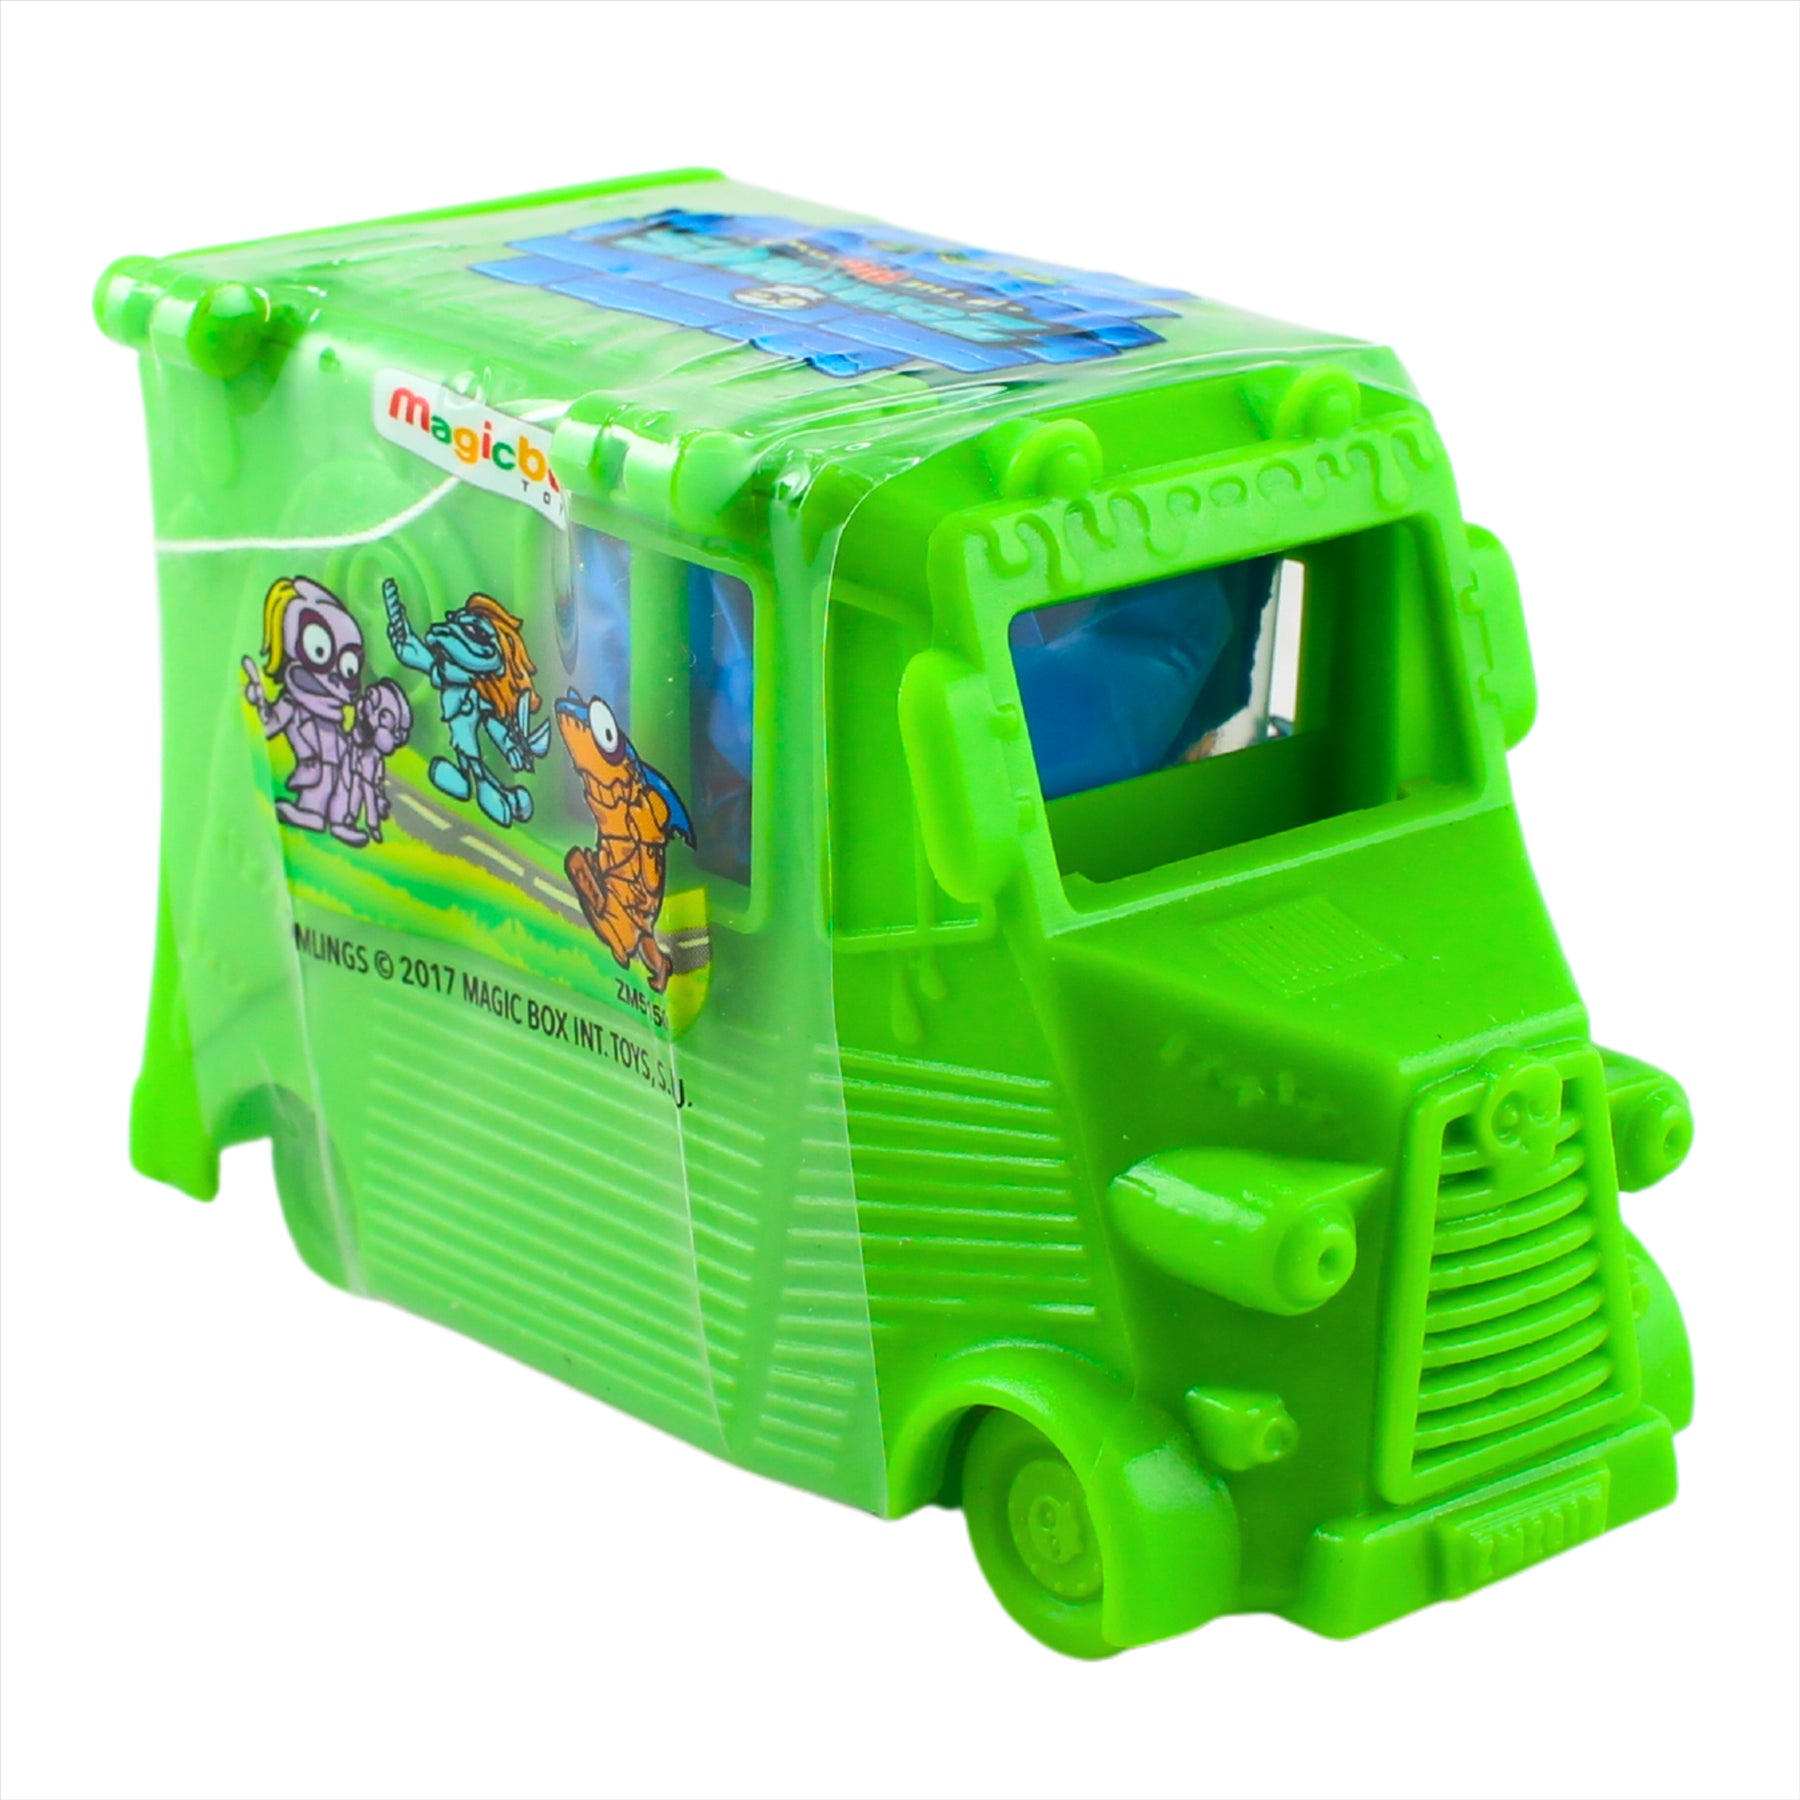 Zomlings Mega-Pack - 3x Buses, 2x Service Vehicles, 1x Multipack of 4 Zomlings, Police Car, and Accessories - 14 Zomlings Total - Pack of 6 - Toptoys2u